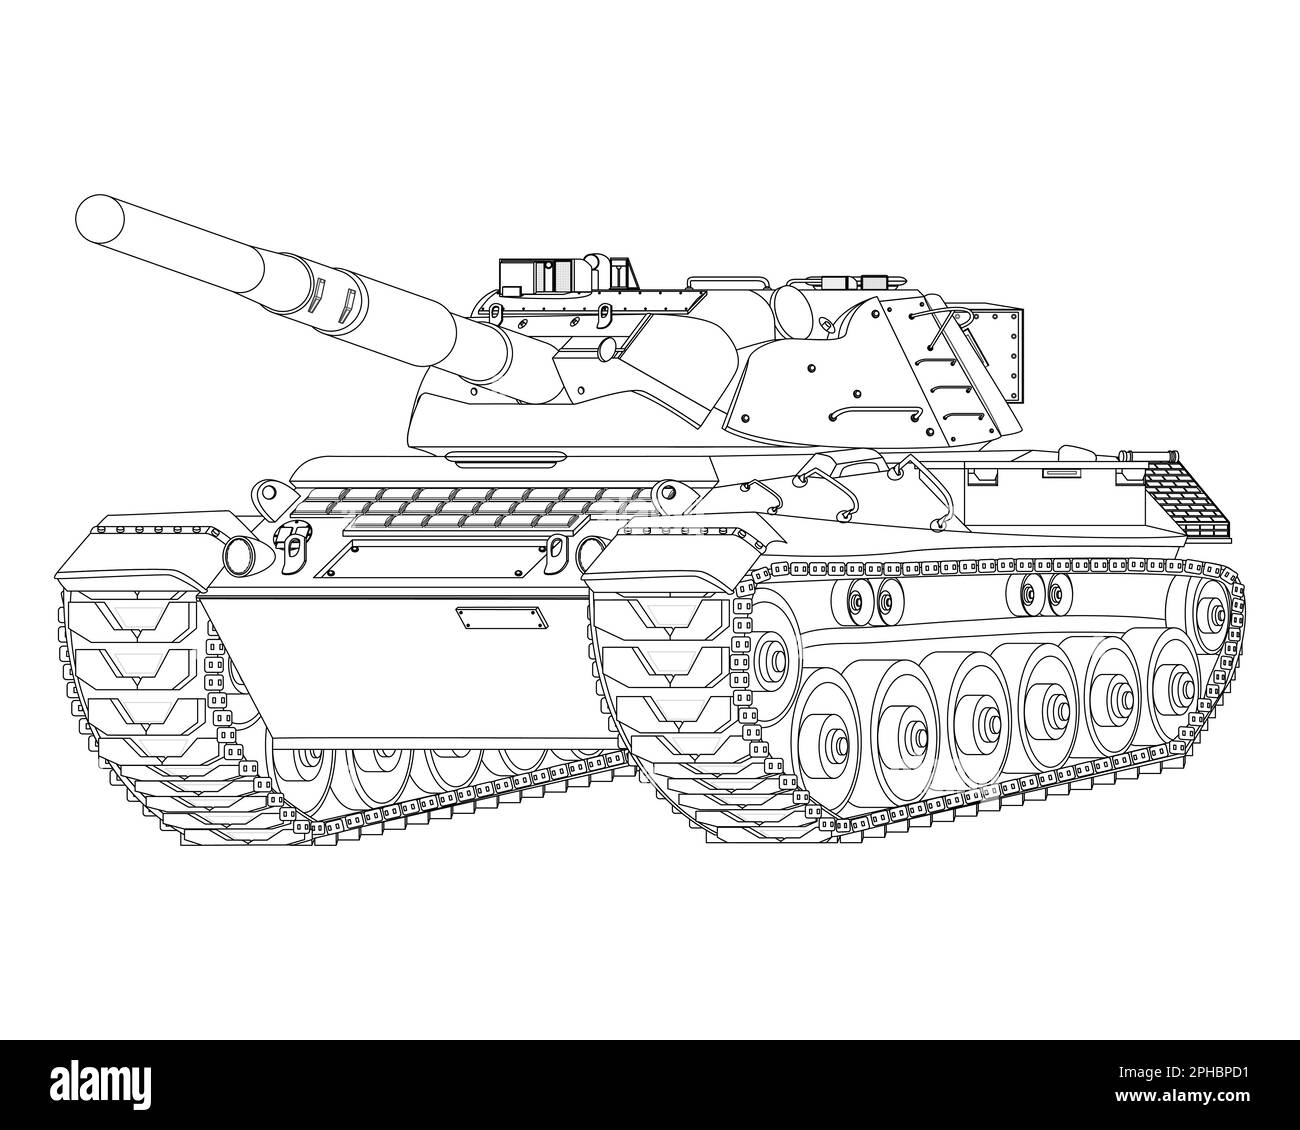 German Leopard I main battle tank Coloring Page. Military vehicle. Vector illustration isolated on white background. Stock Vector